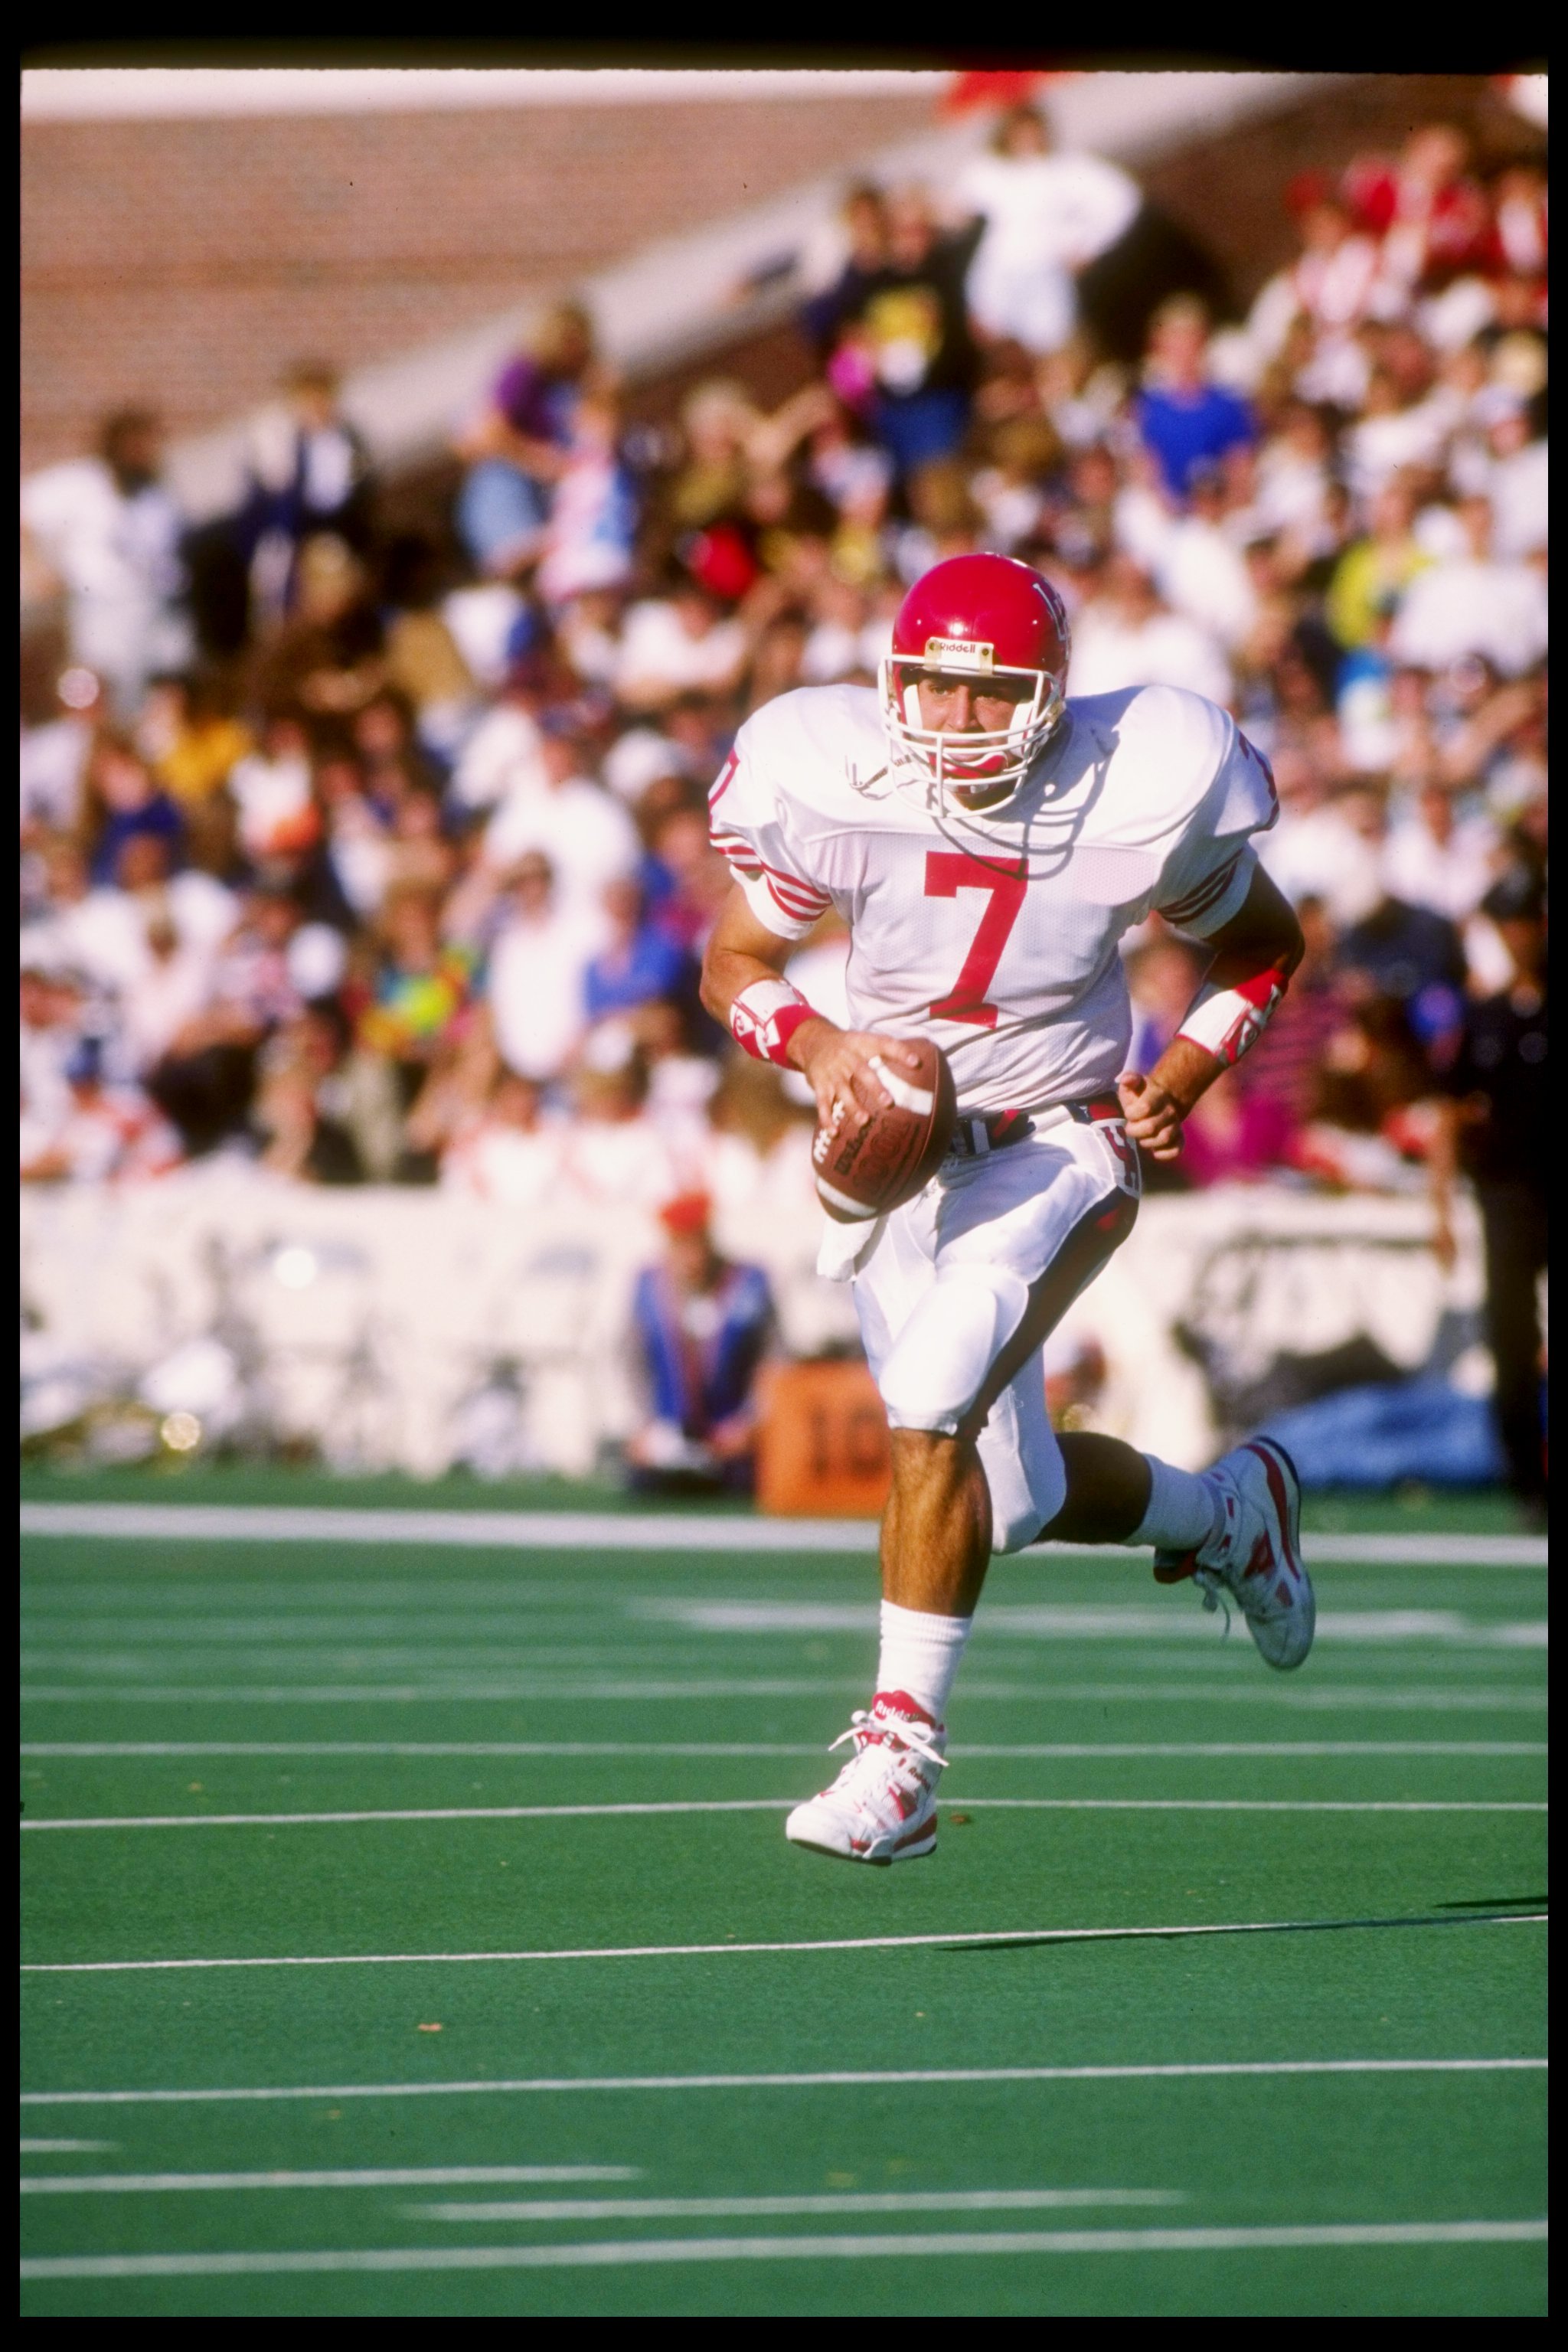 21 Sep 1991: Quarterback David Klingler #7 of the Houston Cougars in action during a game against the Illinois Fighting Illini. The Illinois Fighting Illini won the game 51-10.